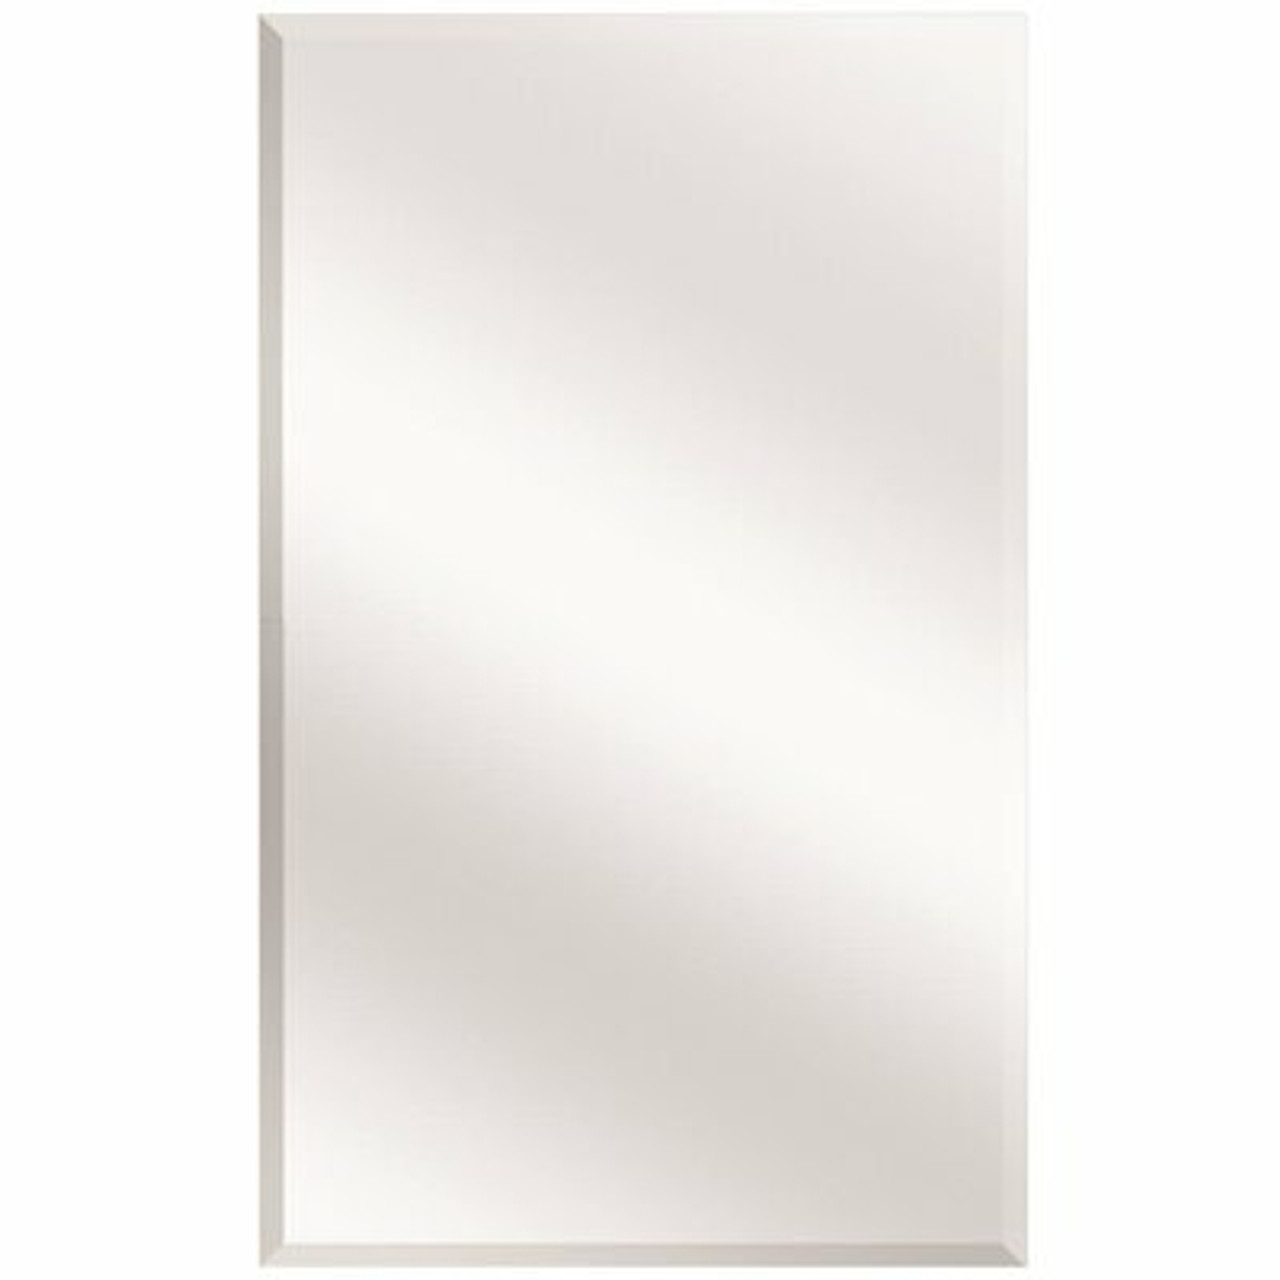 Glacier Bay 16 In. W X 26 In. H Frameless Recessed Or Surface-Mount Bathroom Medicine Cabinet